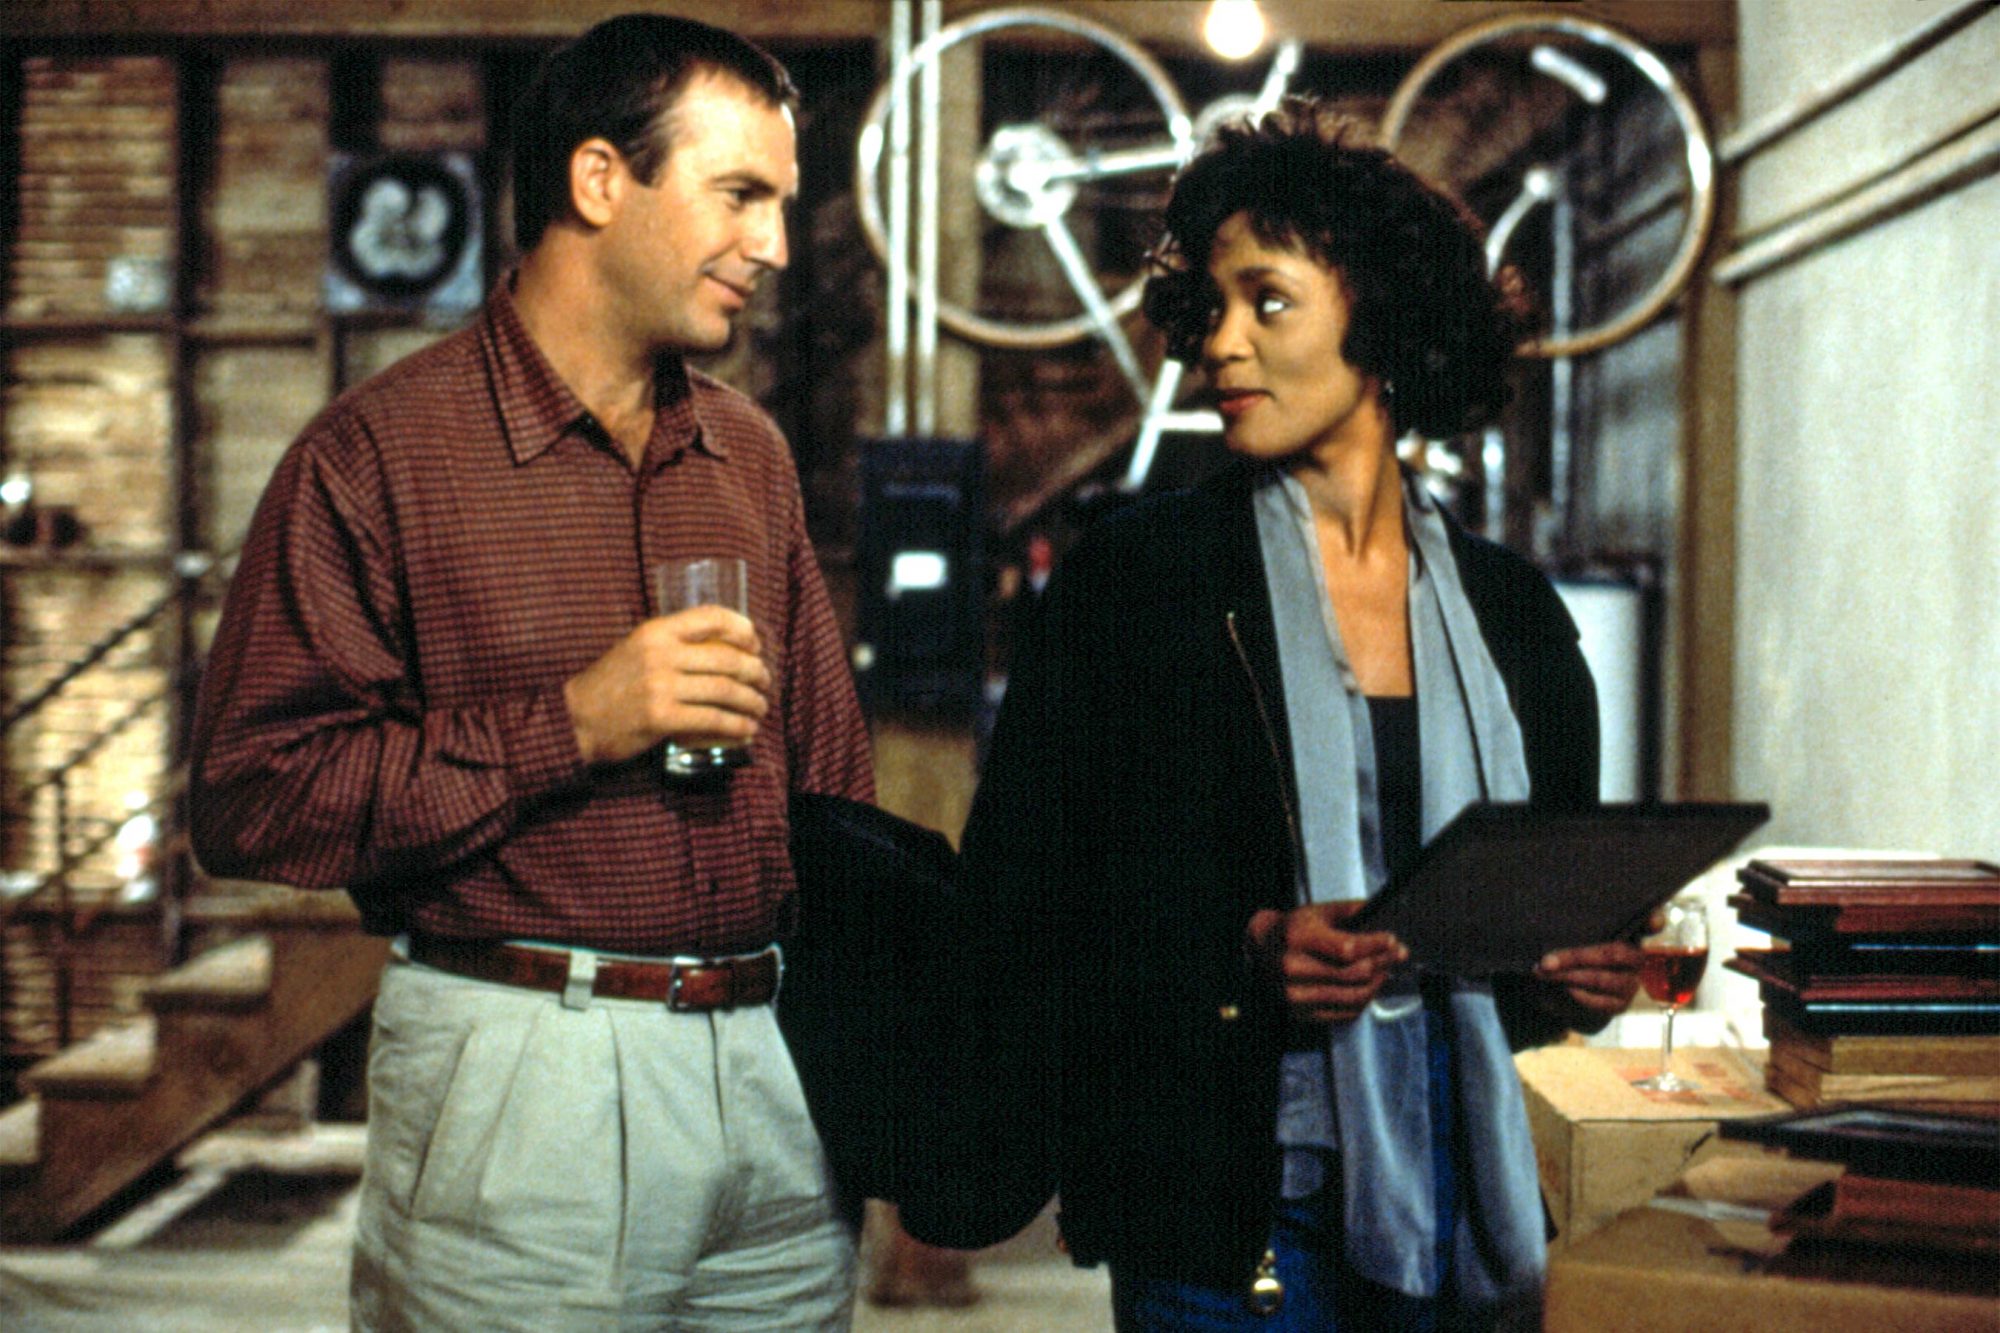 Rotten Tomatoes Facts - kevin costner and whitney houston movie